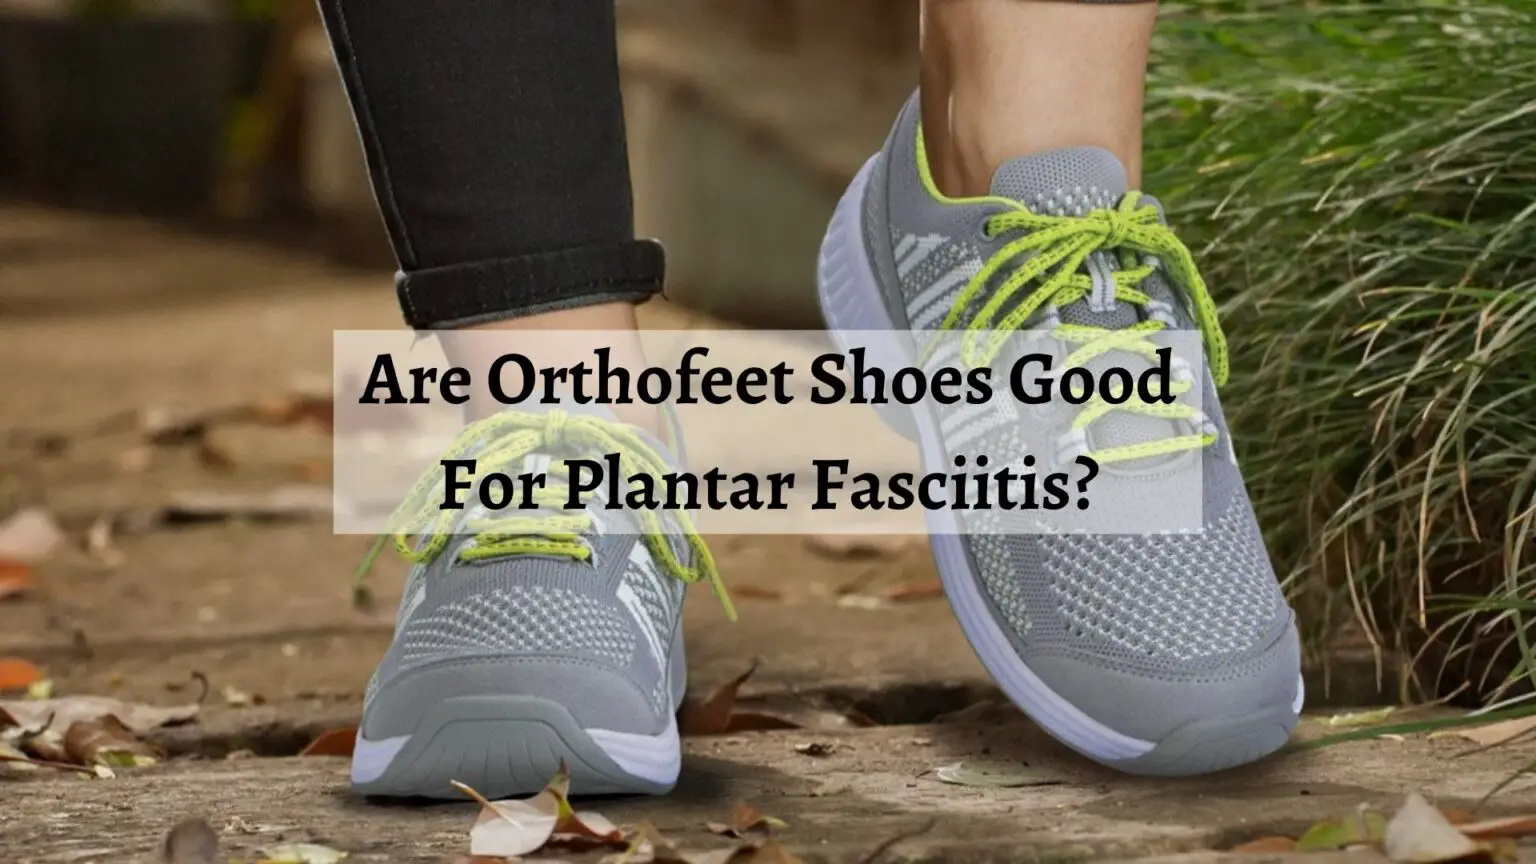 Are Orthofeet Shoes Good For Pain-Free & Comfortable Walk? - Shoe Filter